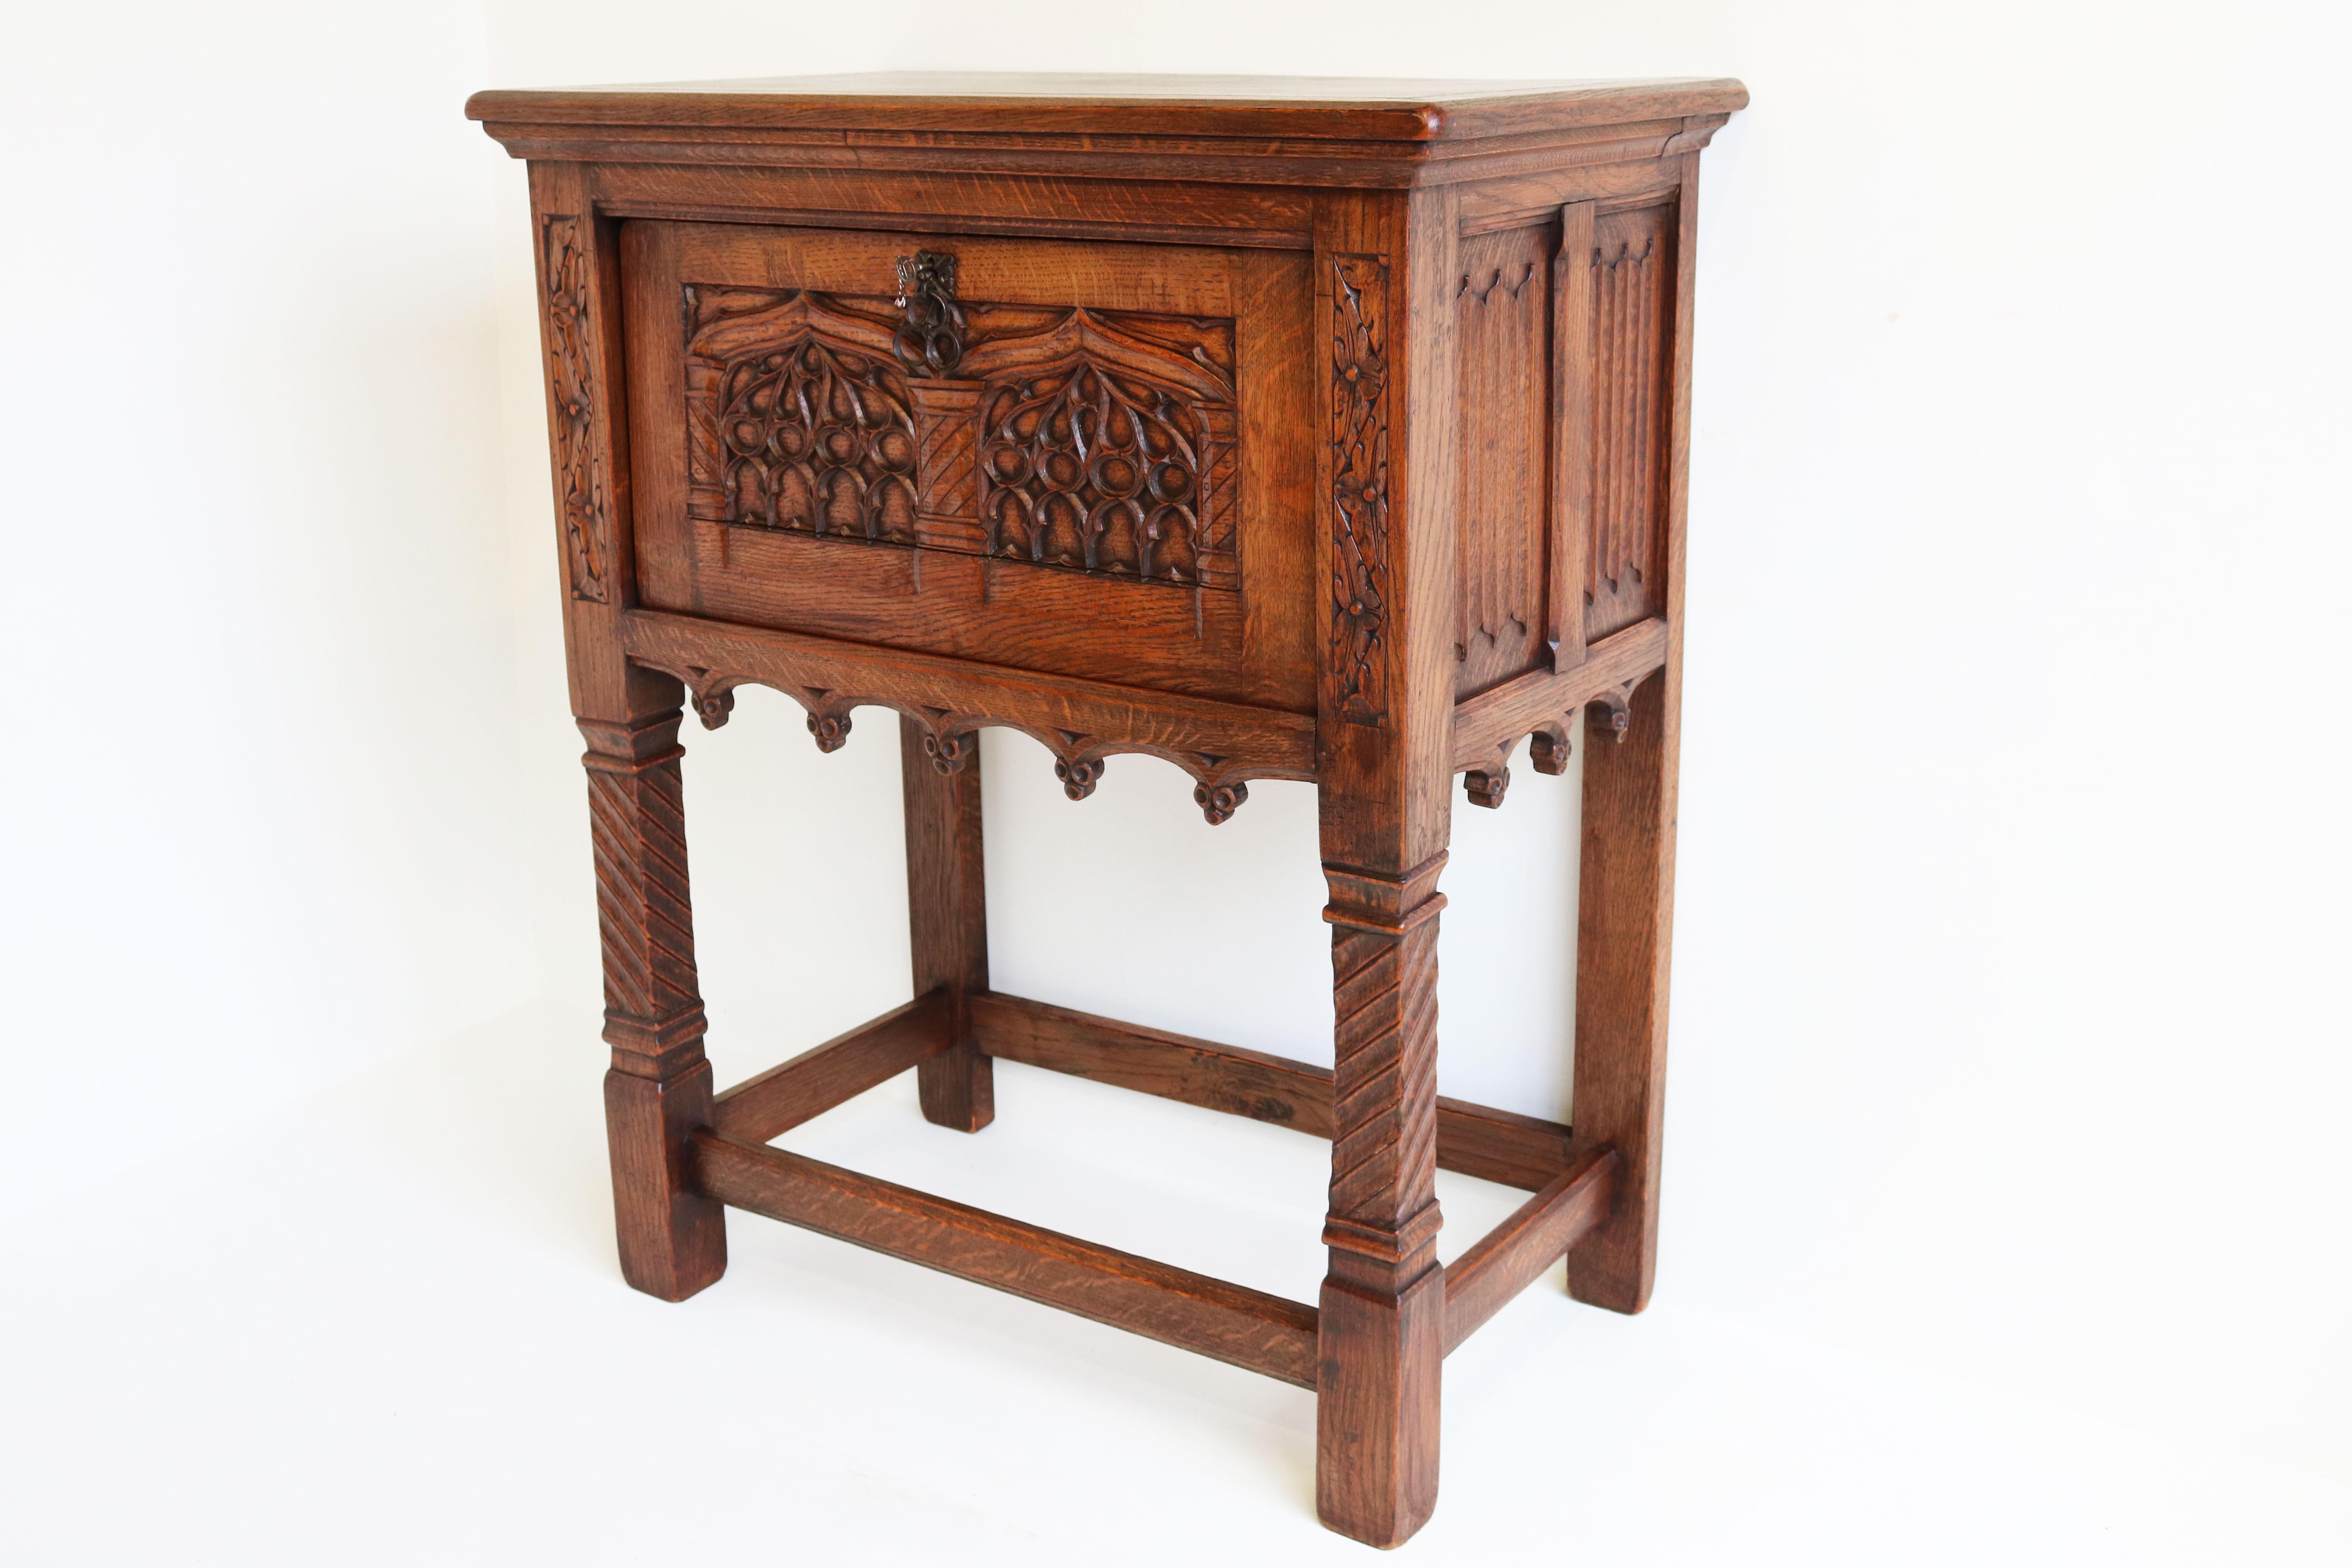 Dutch Rare Gothic Revival Dry Bar / Drinks Cabinet Carved Oak Church Windows Credenza For Sale